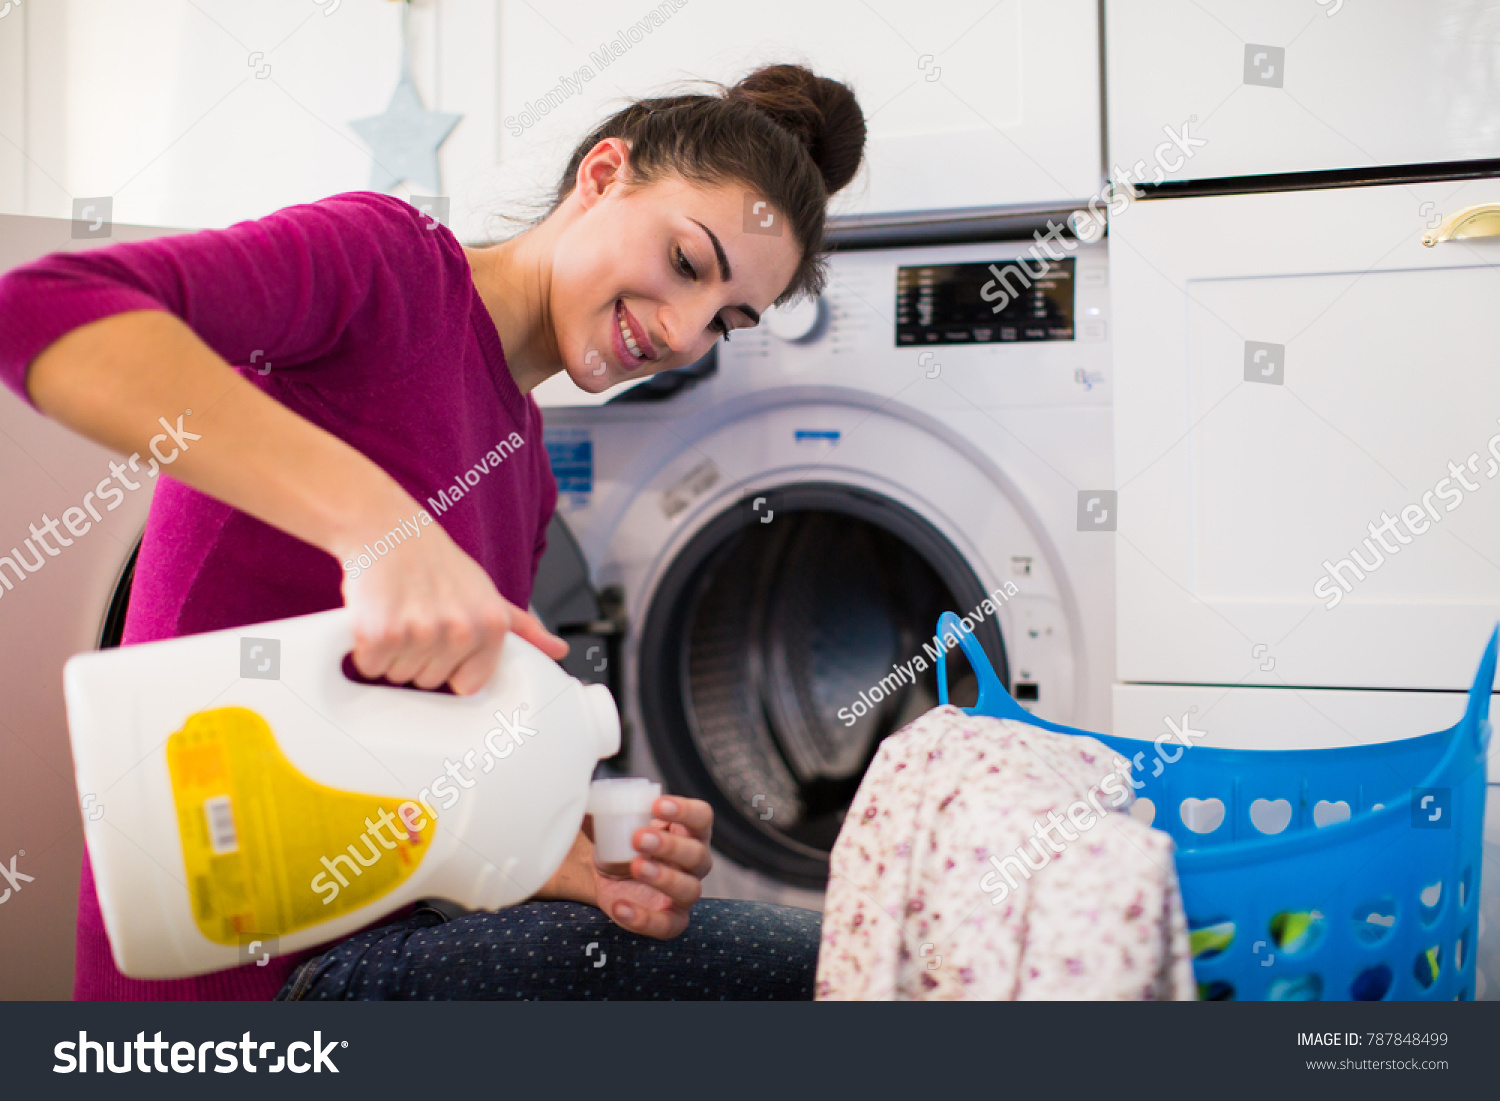 Portrait of the young smiling woman who sitting near washing machine in the room and pouring rinses into the lid #787848499